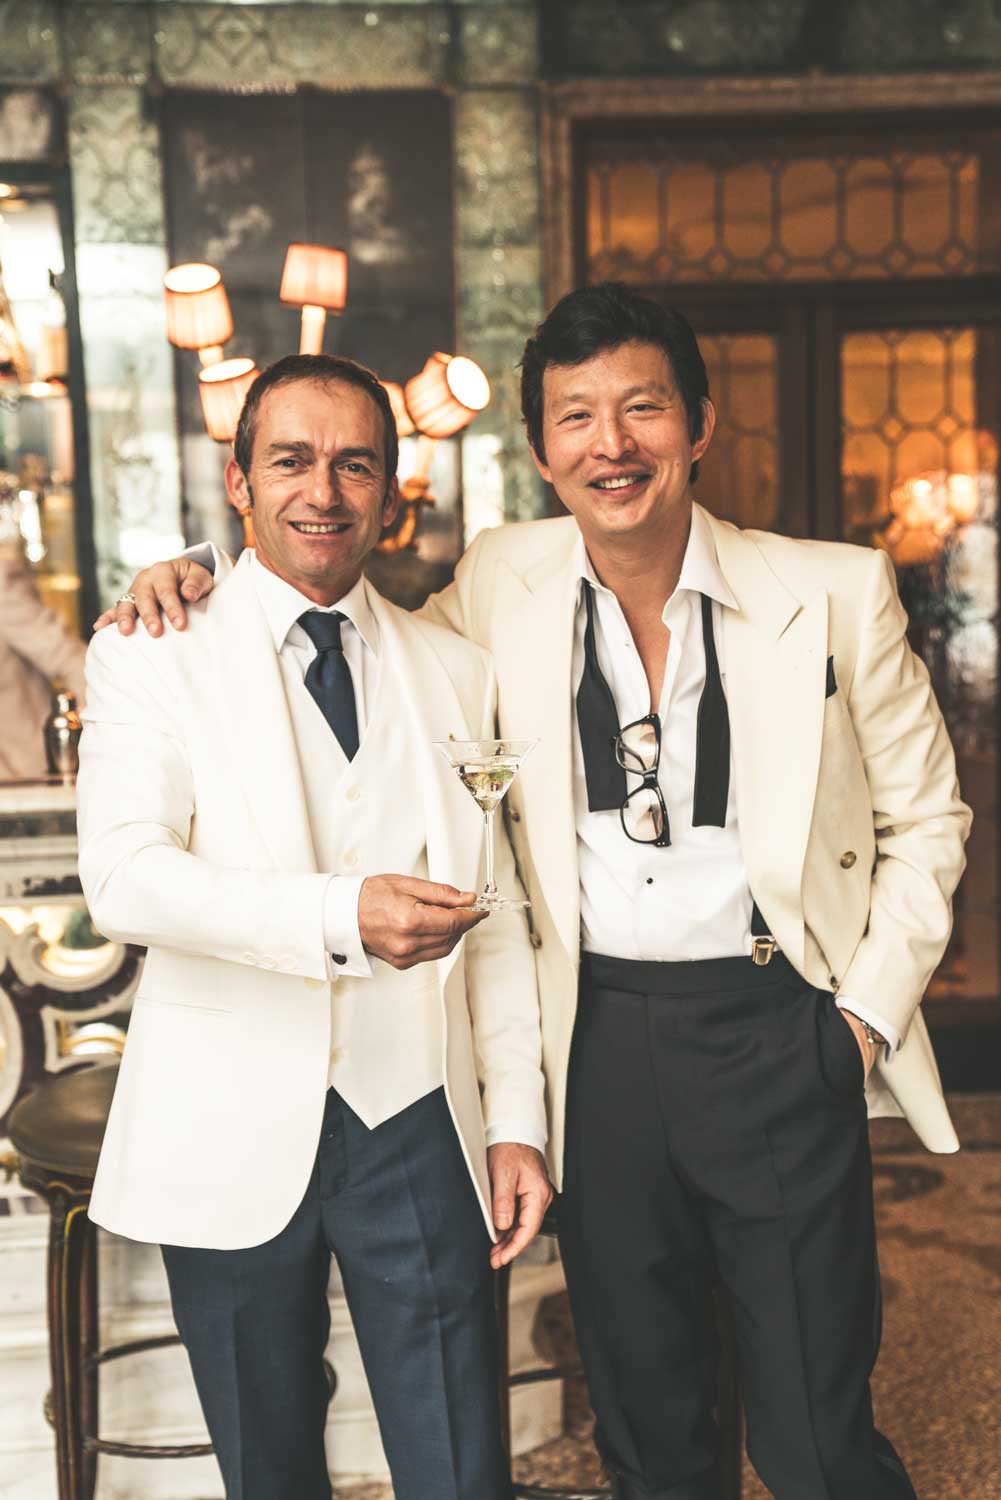 Wei sharing a moment with head barman at the Gritti Palance, Cristiano Luciani (©Revolution)